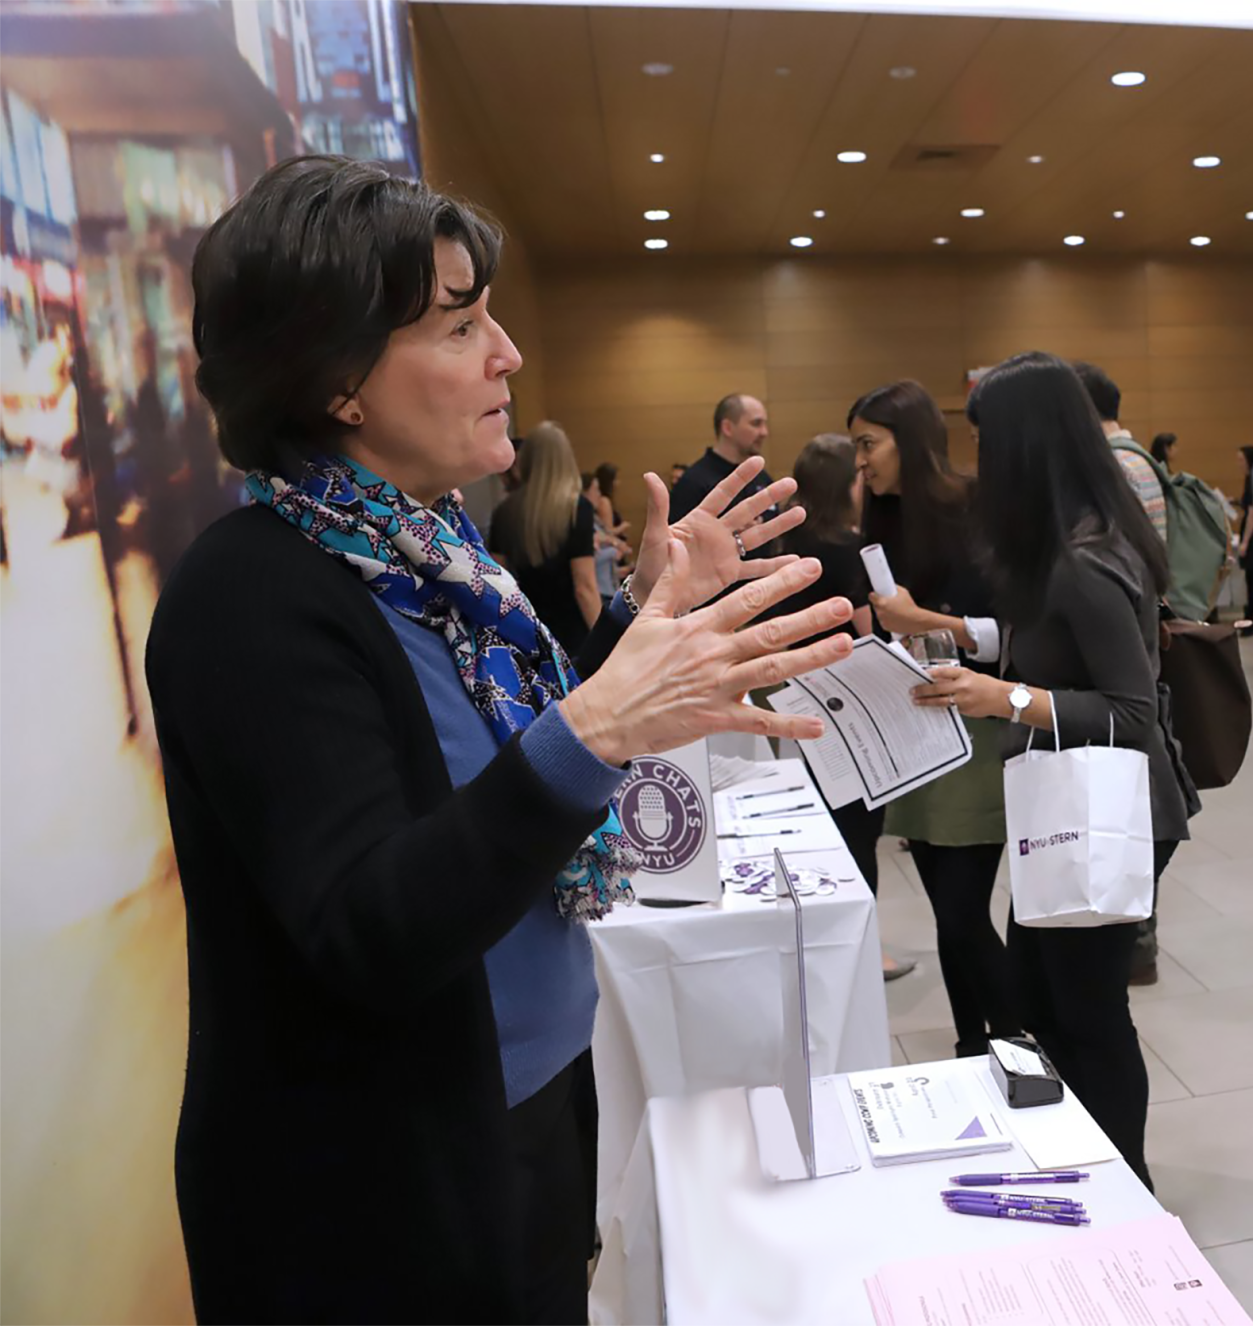 An Event for Career Support at NYU Stern